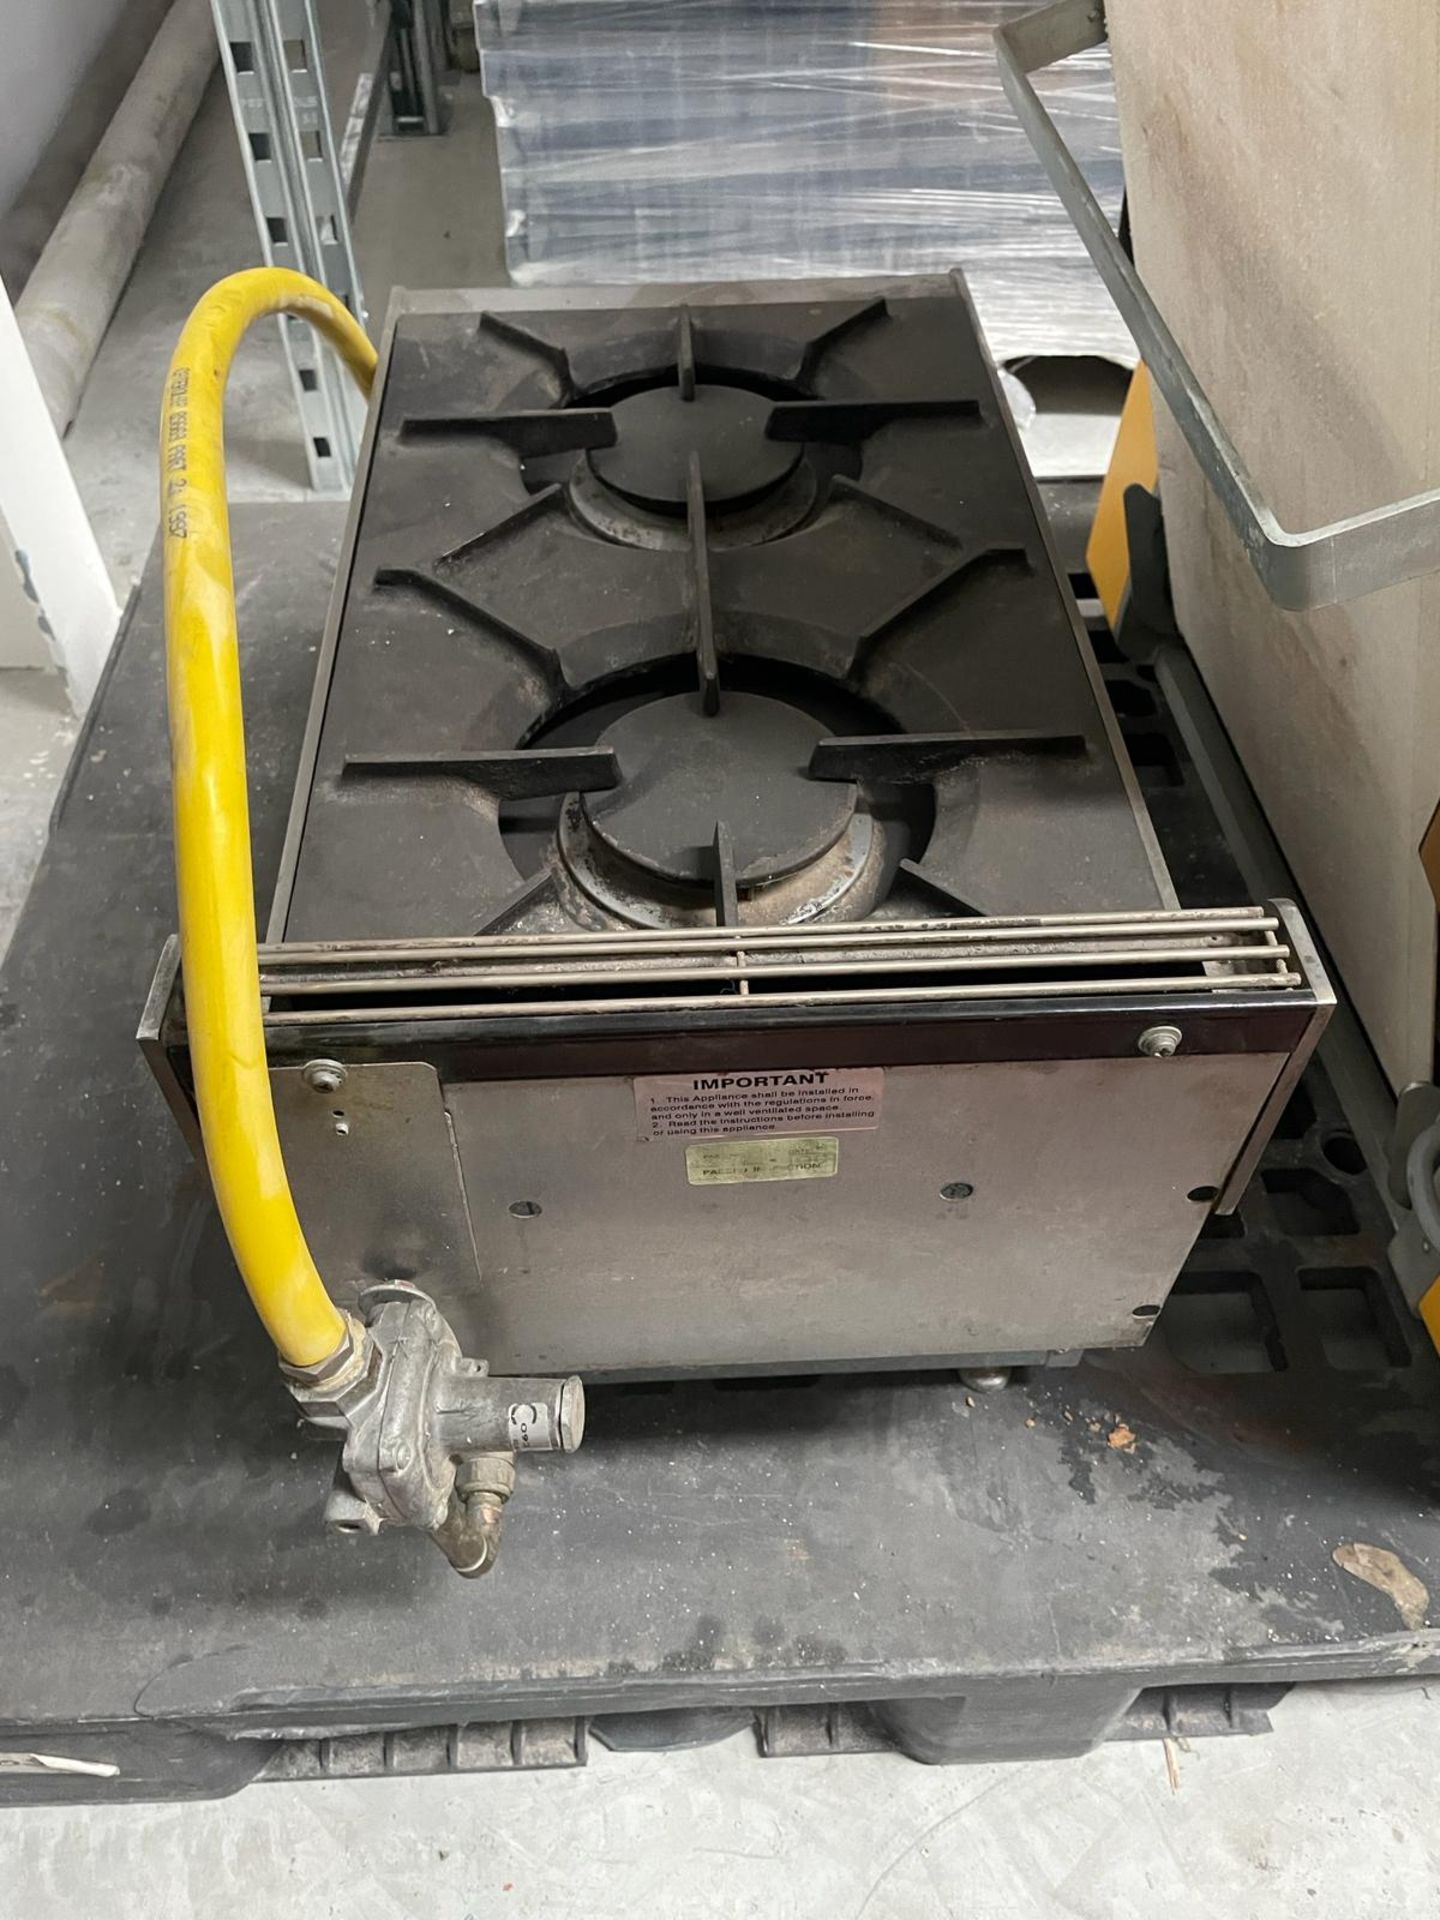 Falcon 2 rings gas burner. 700 x 350 mm. Please note this lot is located at Unit 29, Ridge Way, - Image 2 of 3